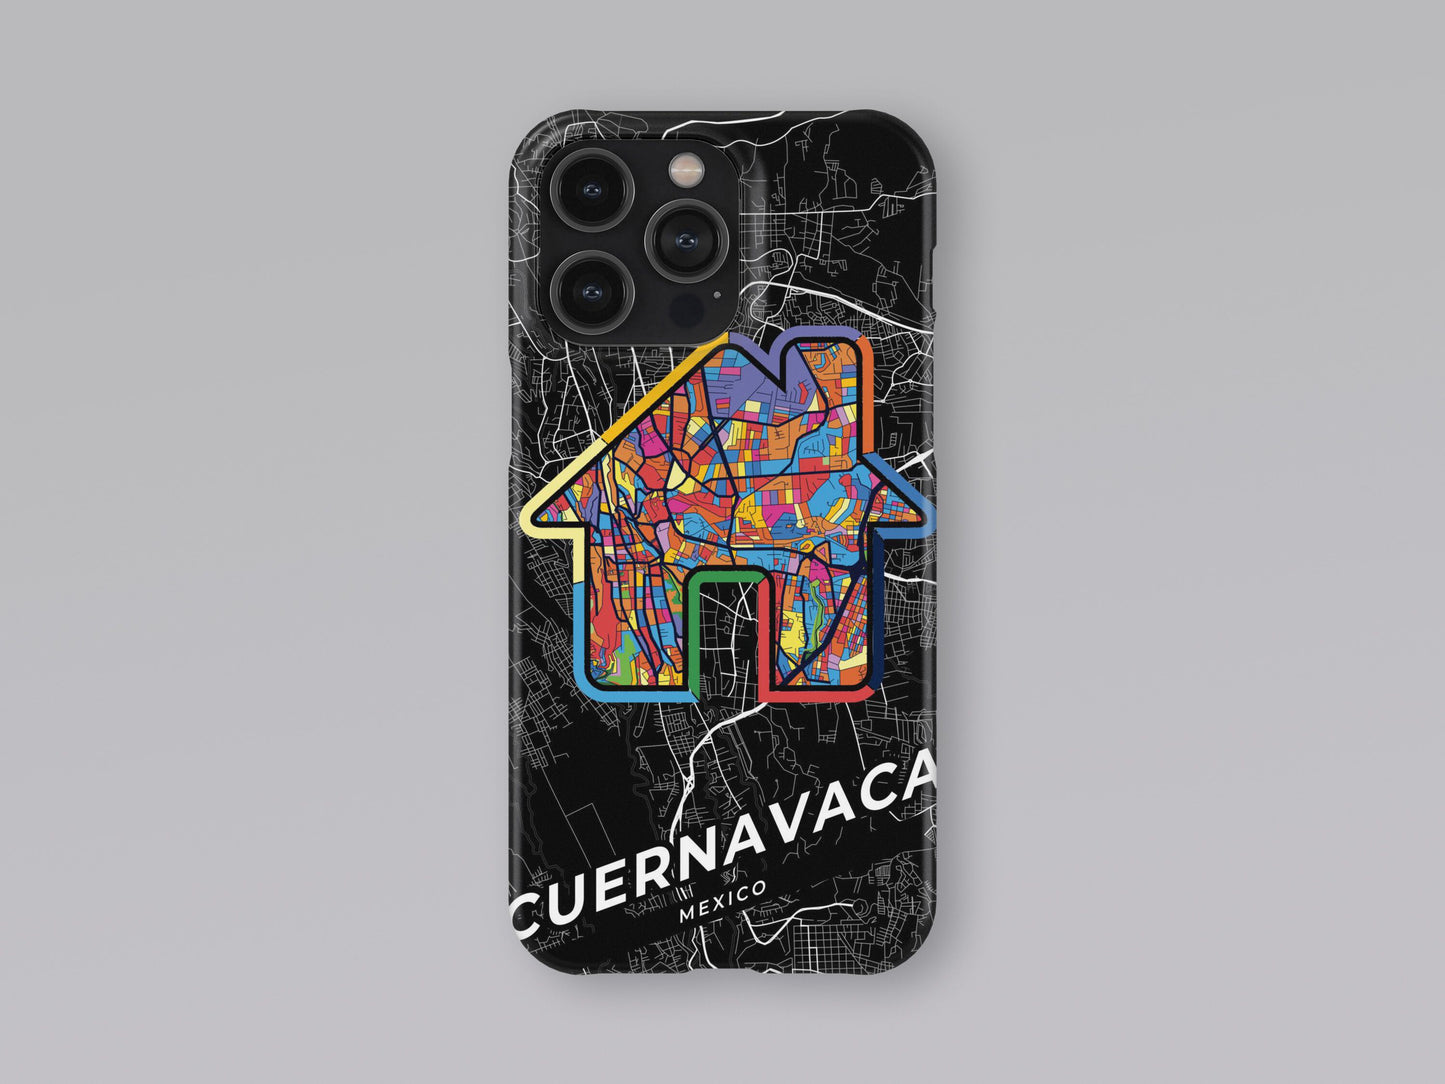 Cuernavaca Mexico slim phone case with colorful icon. Birthday, wedding or housewarming gift. Couple match cases. 3